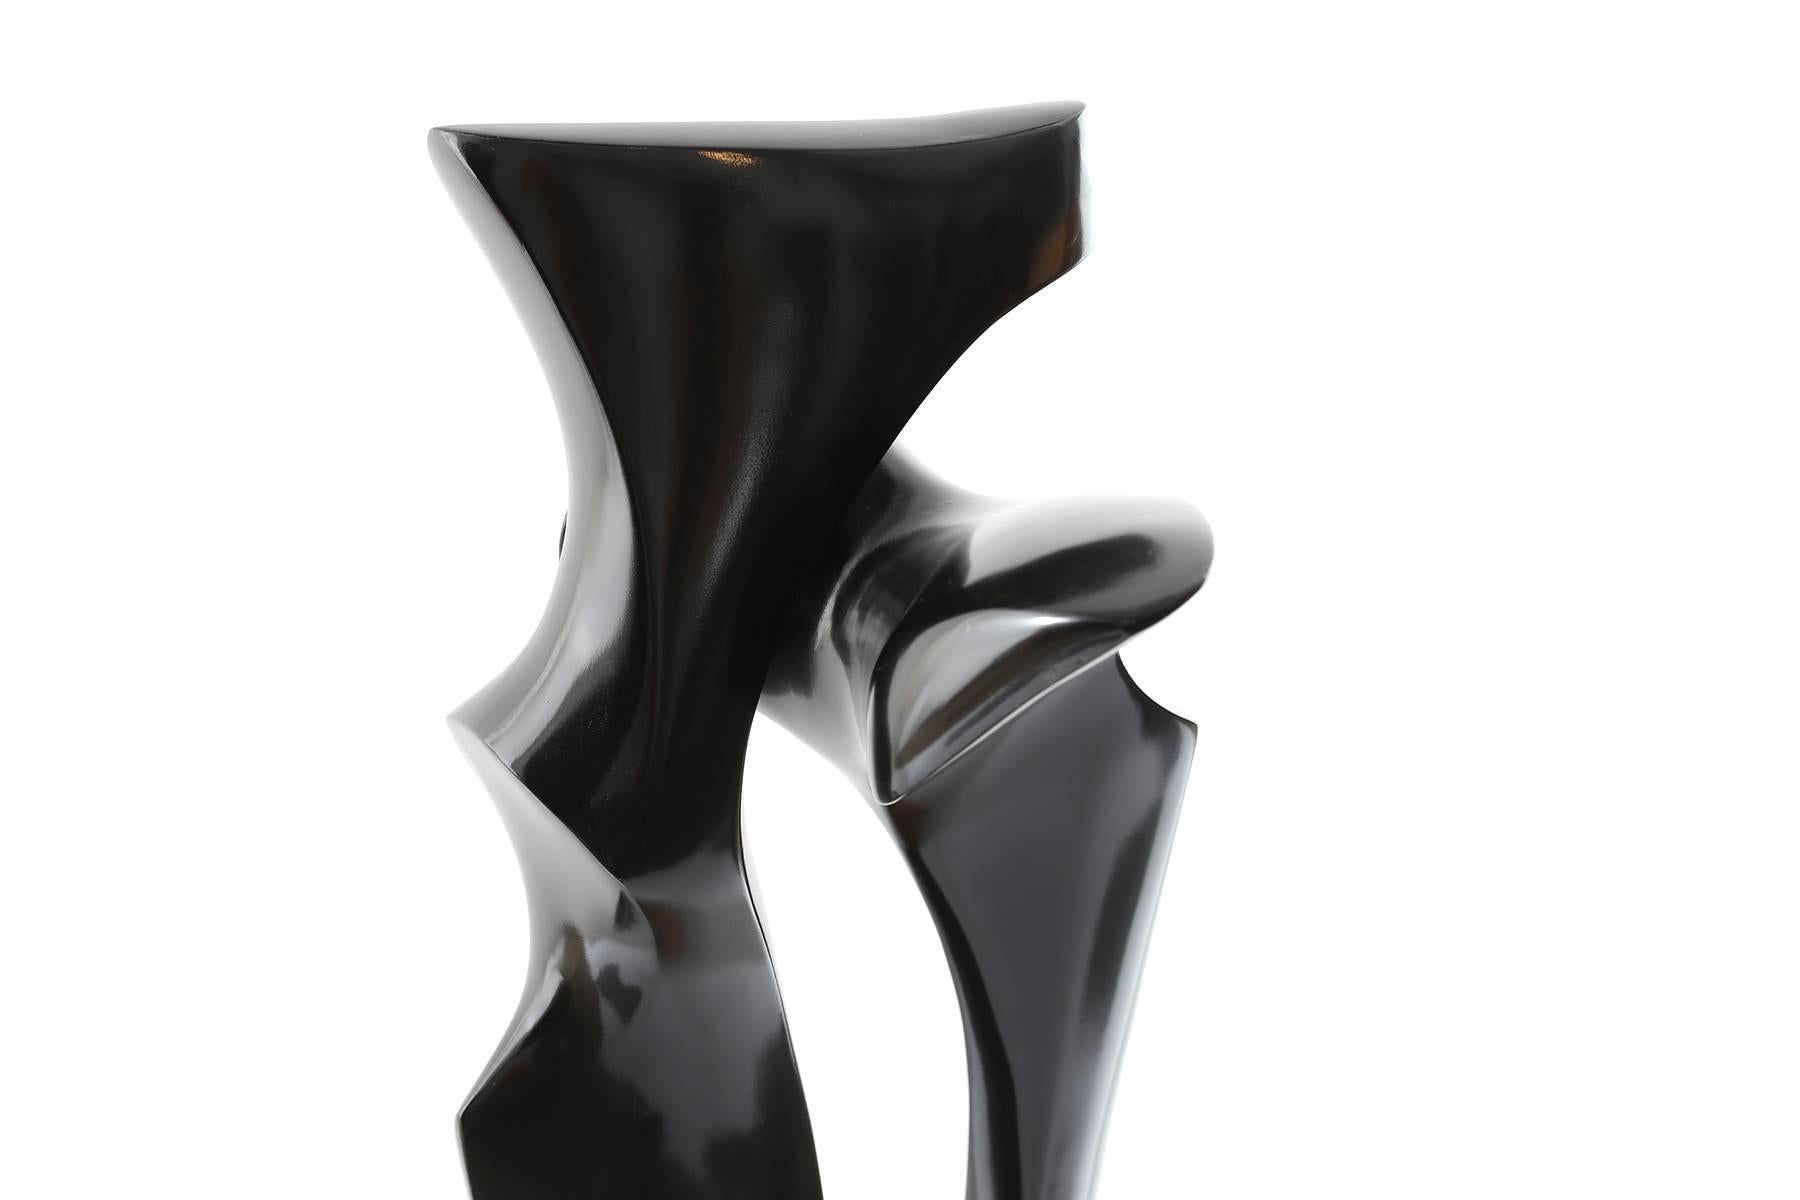 Ebonized wood sculpture, circa early 1970s. This stunning work was unsigned when we acquired it. It stands atop a copper and figural wood base and truly looks stunning from every angle. This was shown some time ago at the Udinotti Gallery in